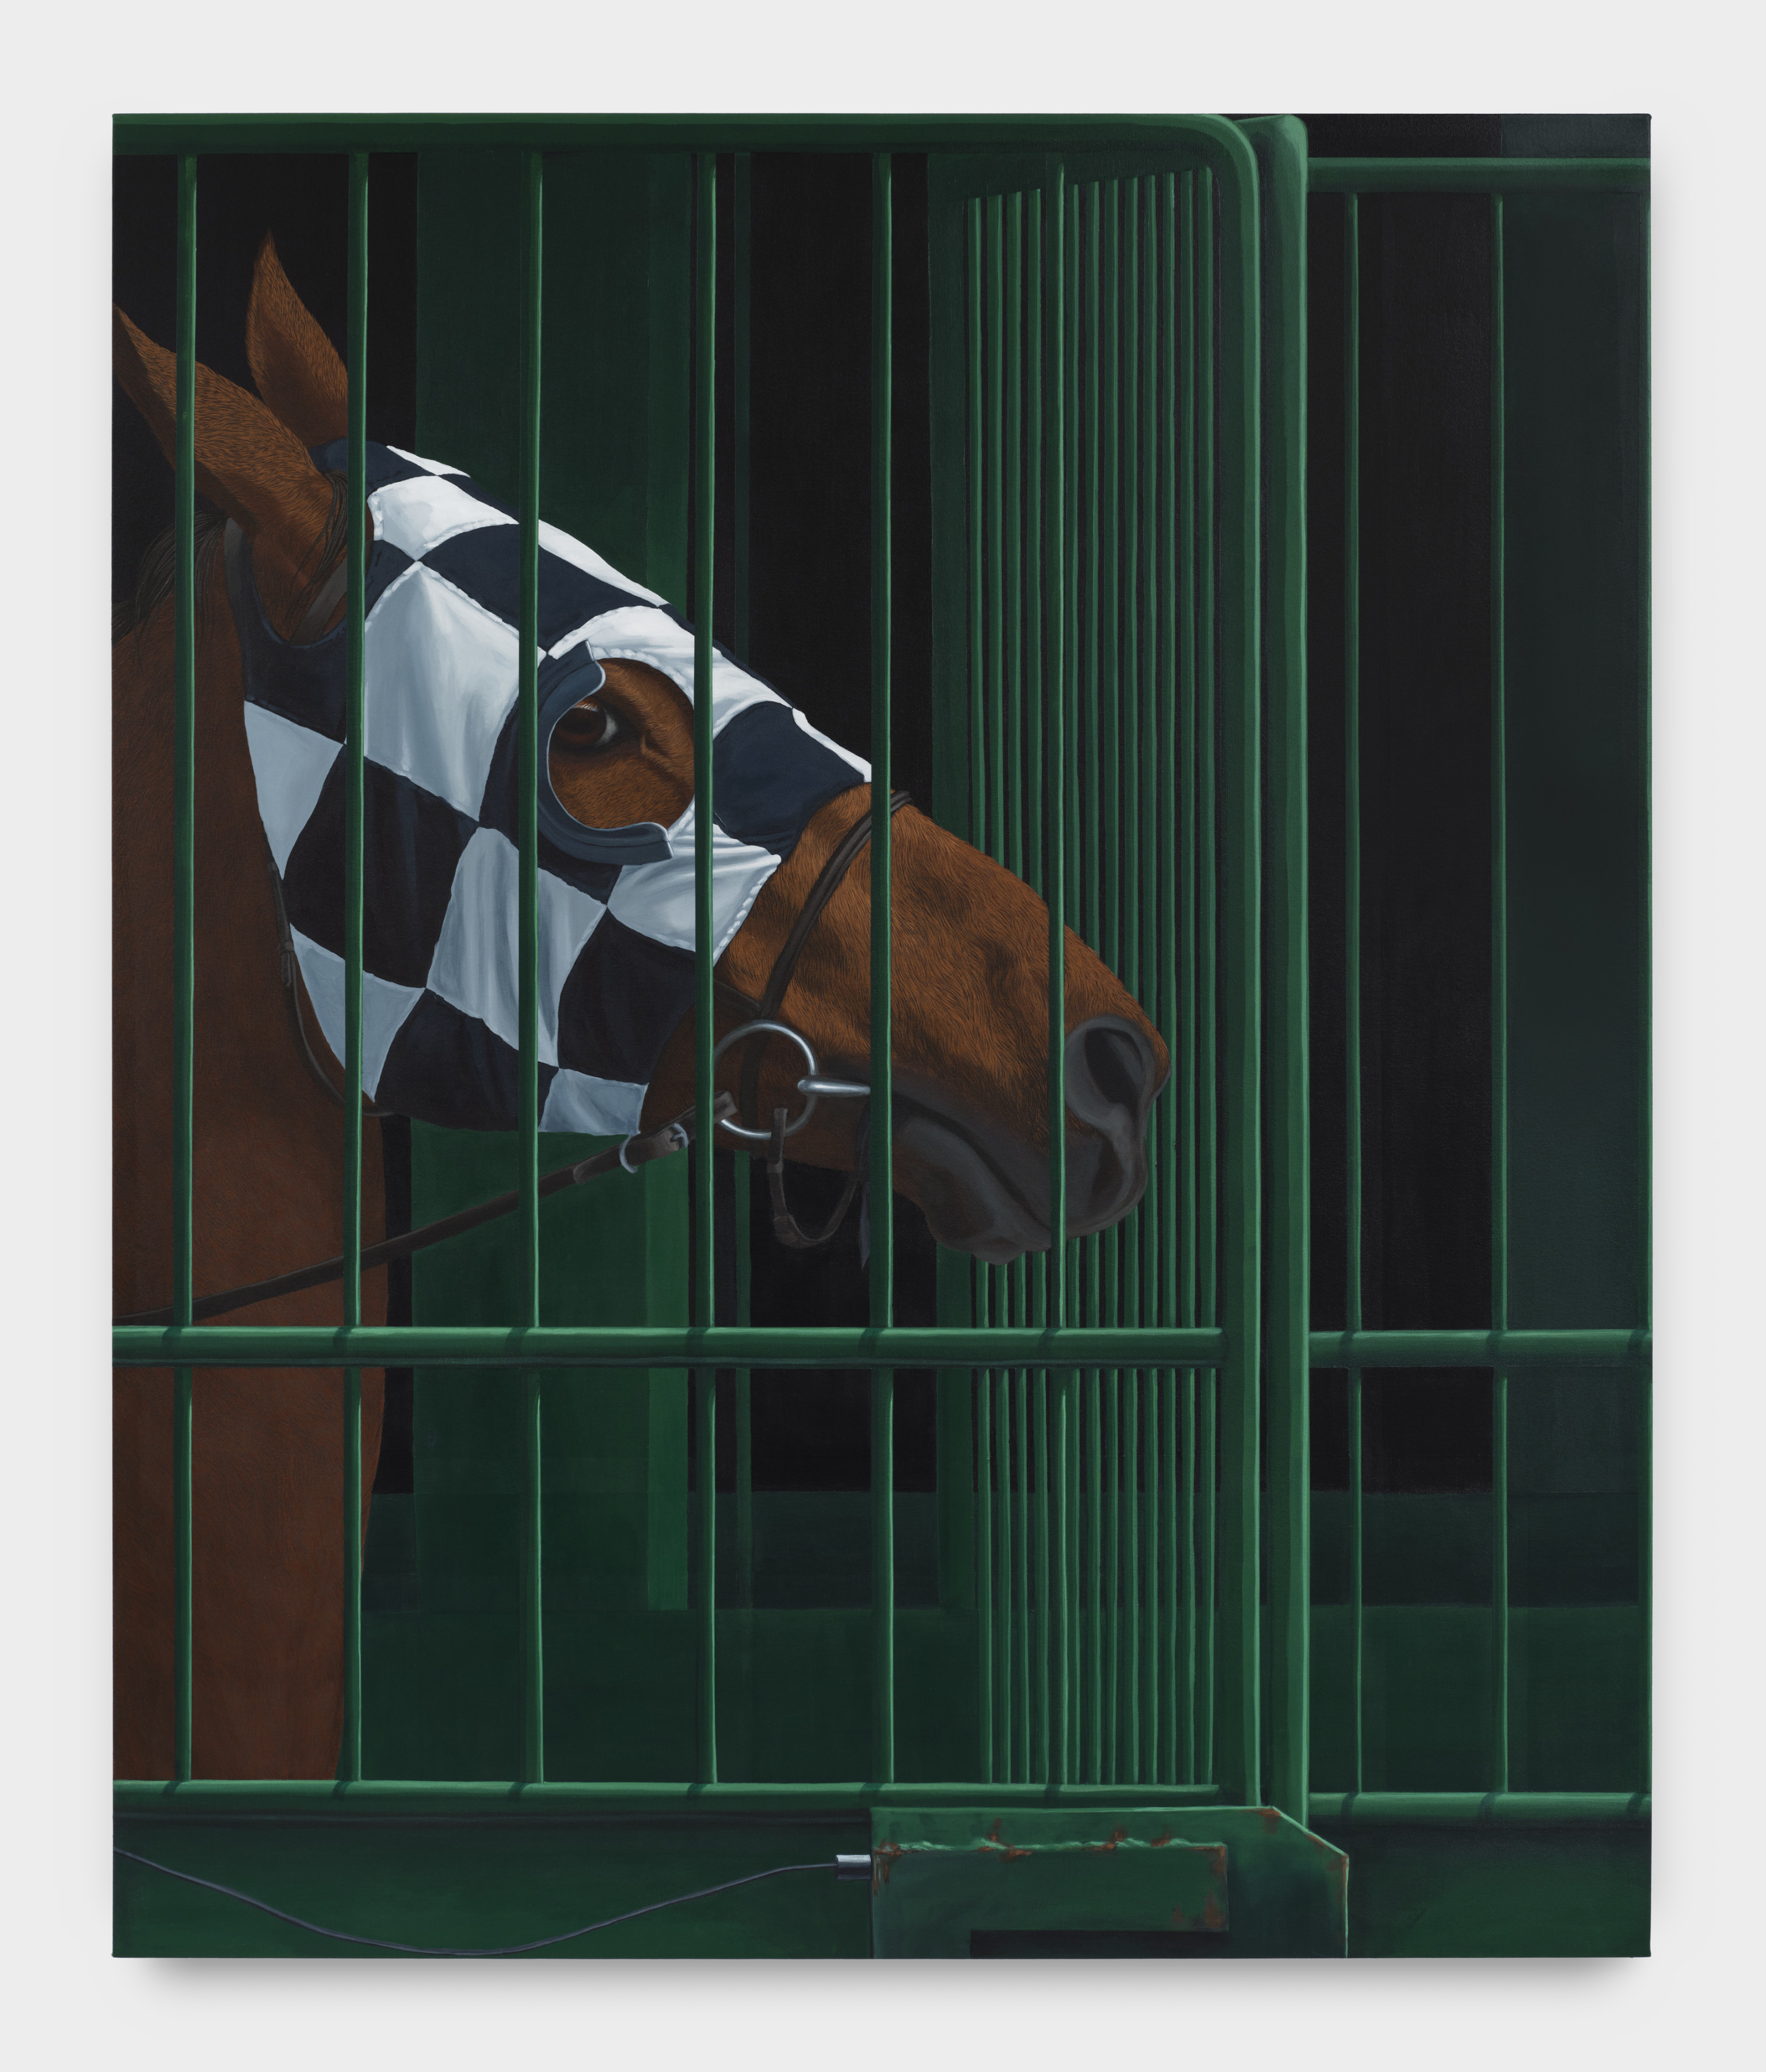 A painting depicting a brown horse in a checkered jumper mask looks out at the viewer from behind a green gated paddock.